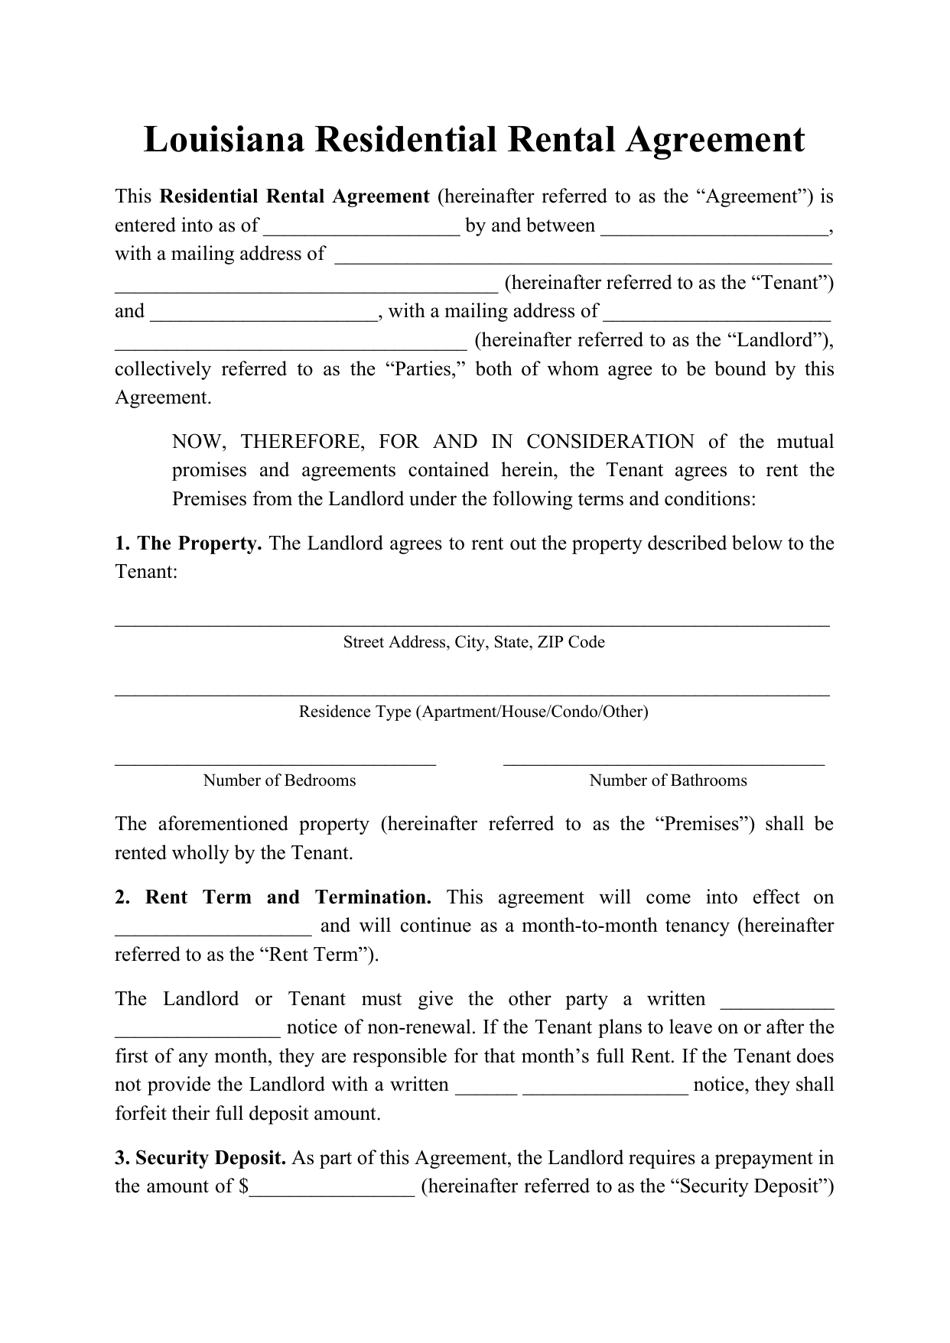 louisiana-residential-rental-agreement-template-fill-out-sign-online-and-download-pdf